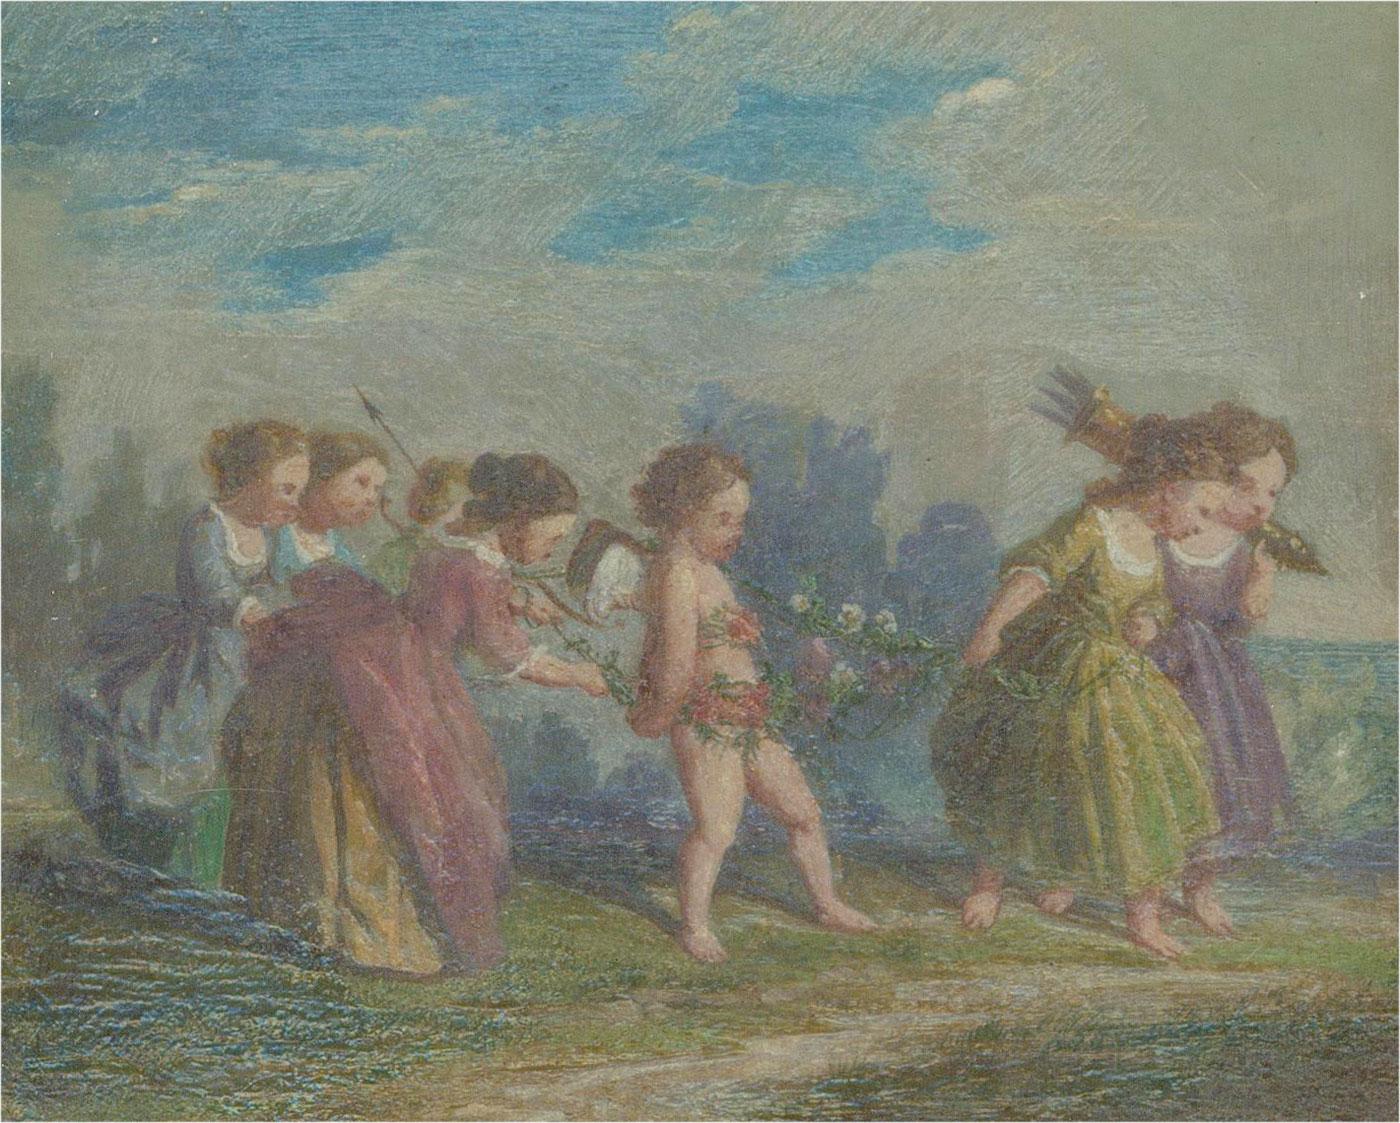 This accomplished allegorical scene depicts the story in Anacreon’s Ode where Cupid is captured by the Muses. Entwined in a chain of flowers, the Muses lead cupid to captivity, where he grows so accustomed to their servitude that Venus was unable to